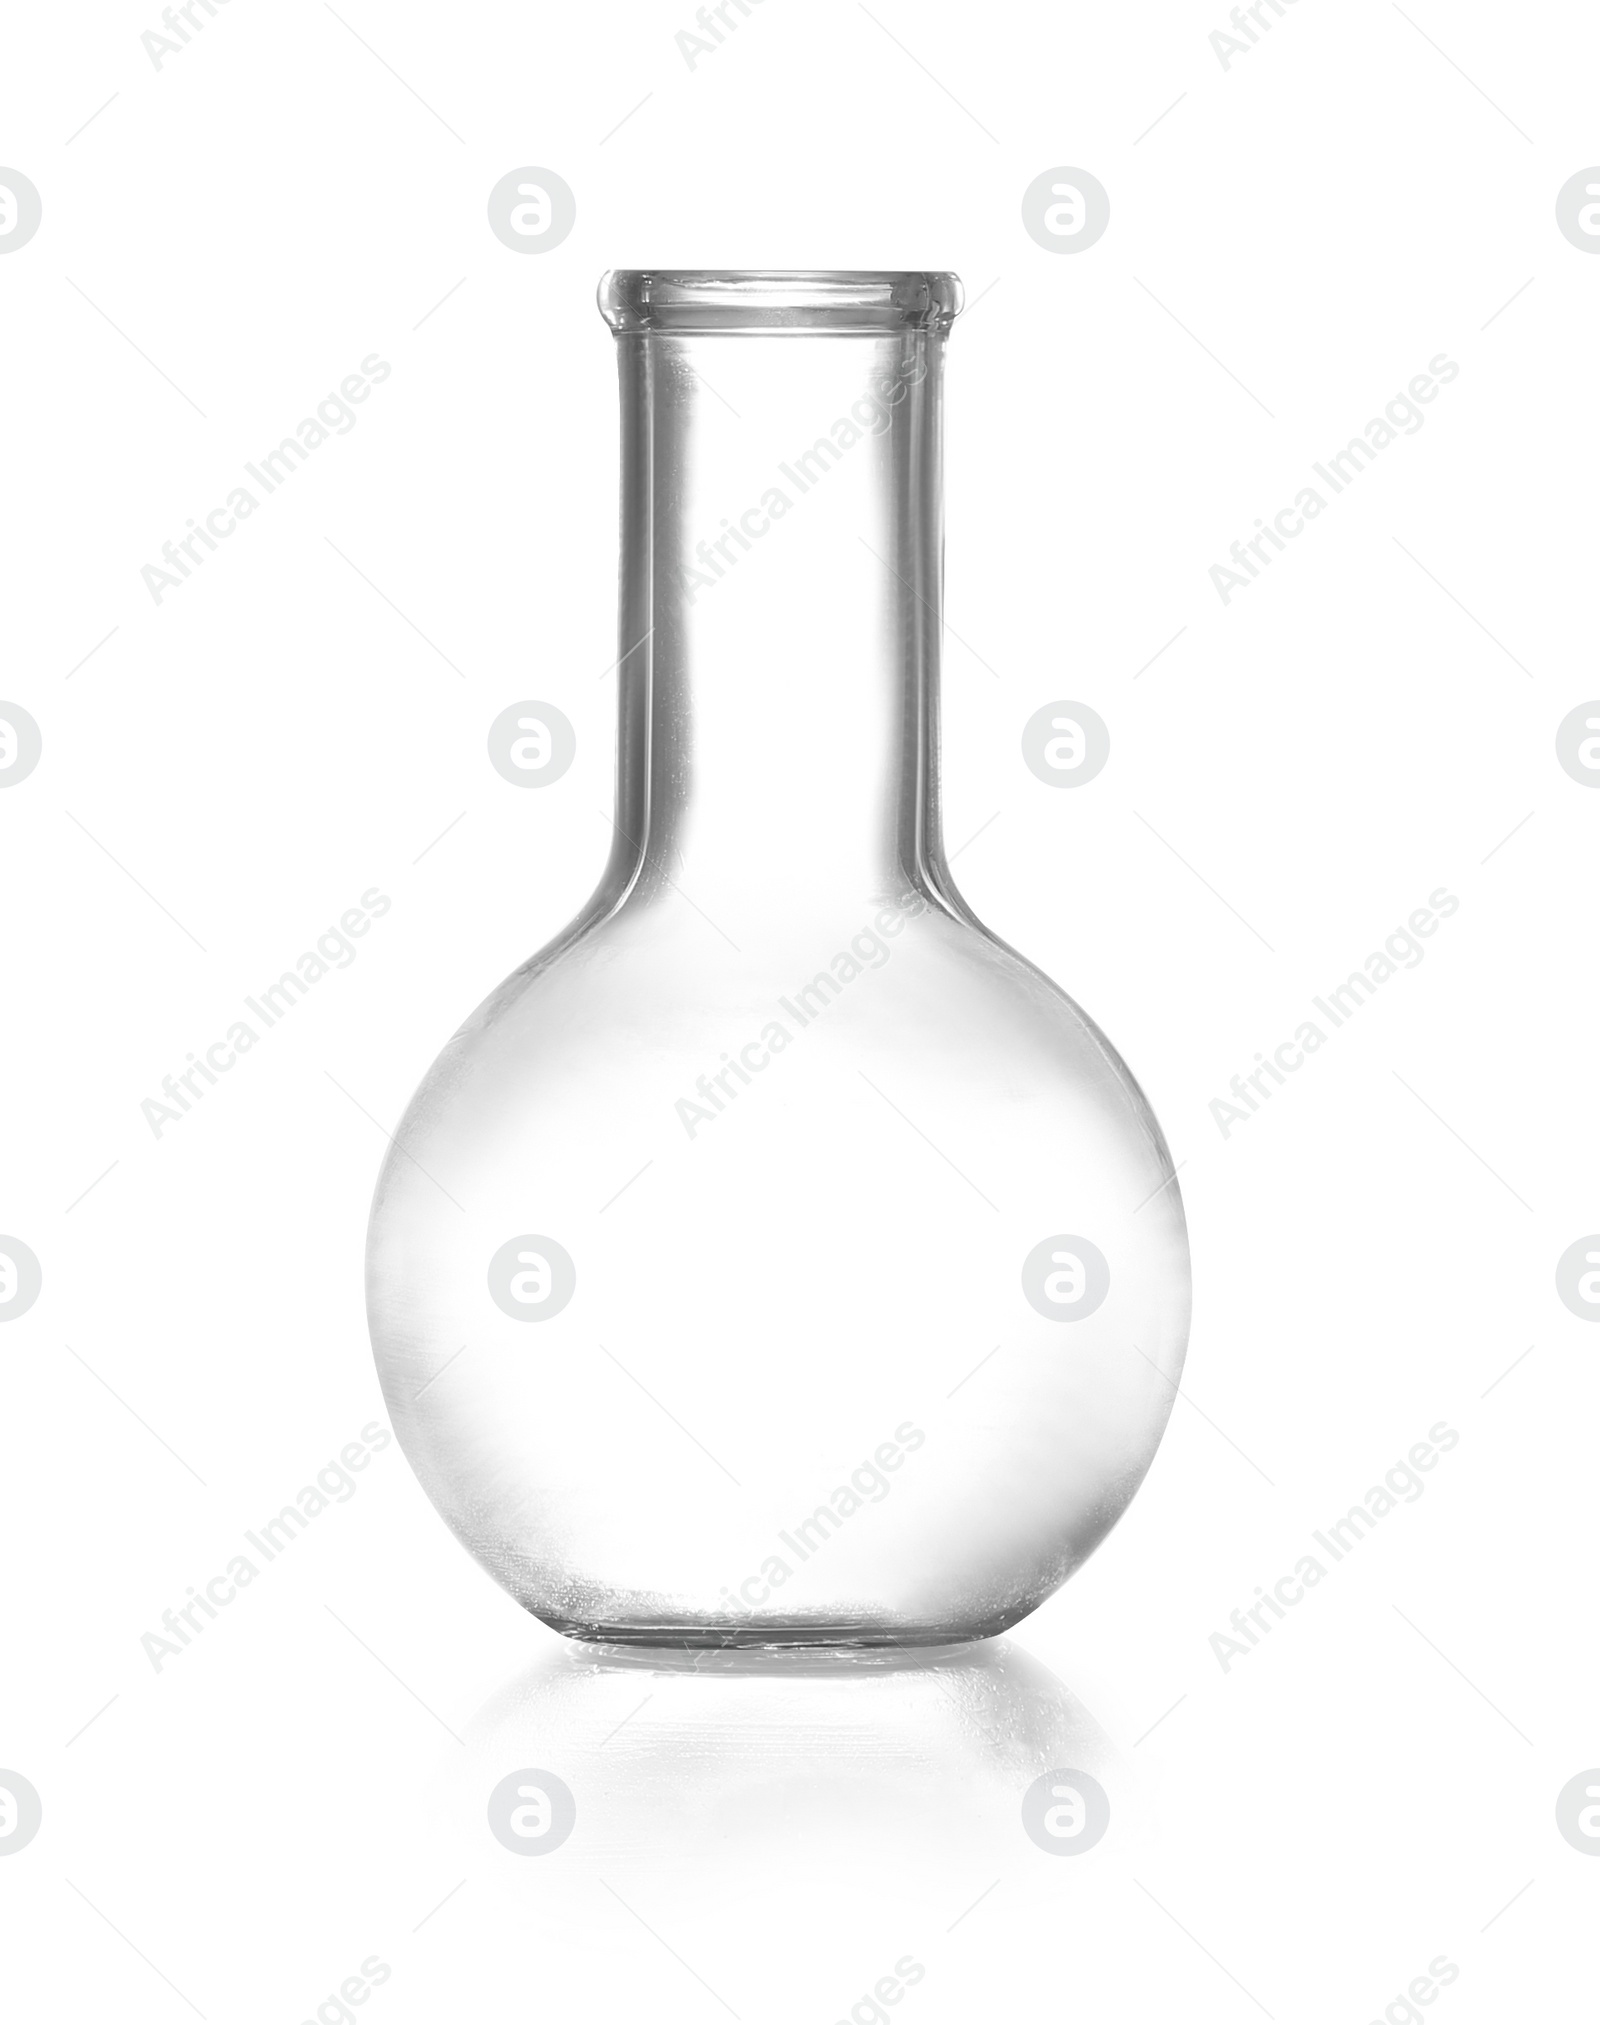 Photo of Empty Florence flask on white background. Chemistry glassware